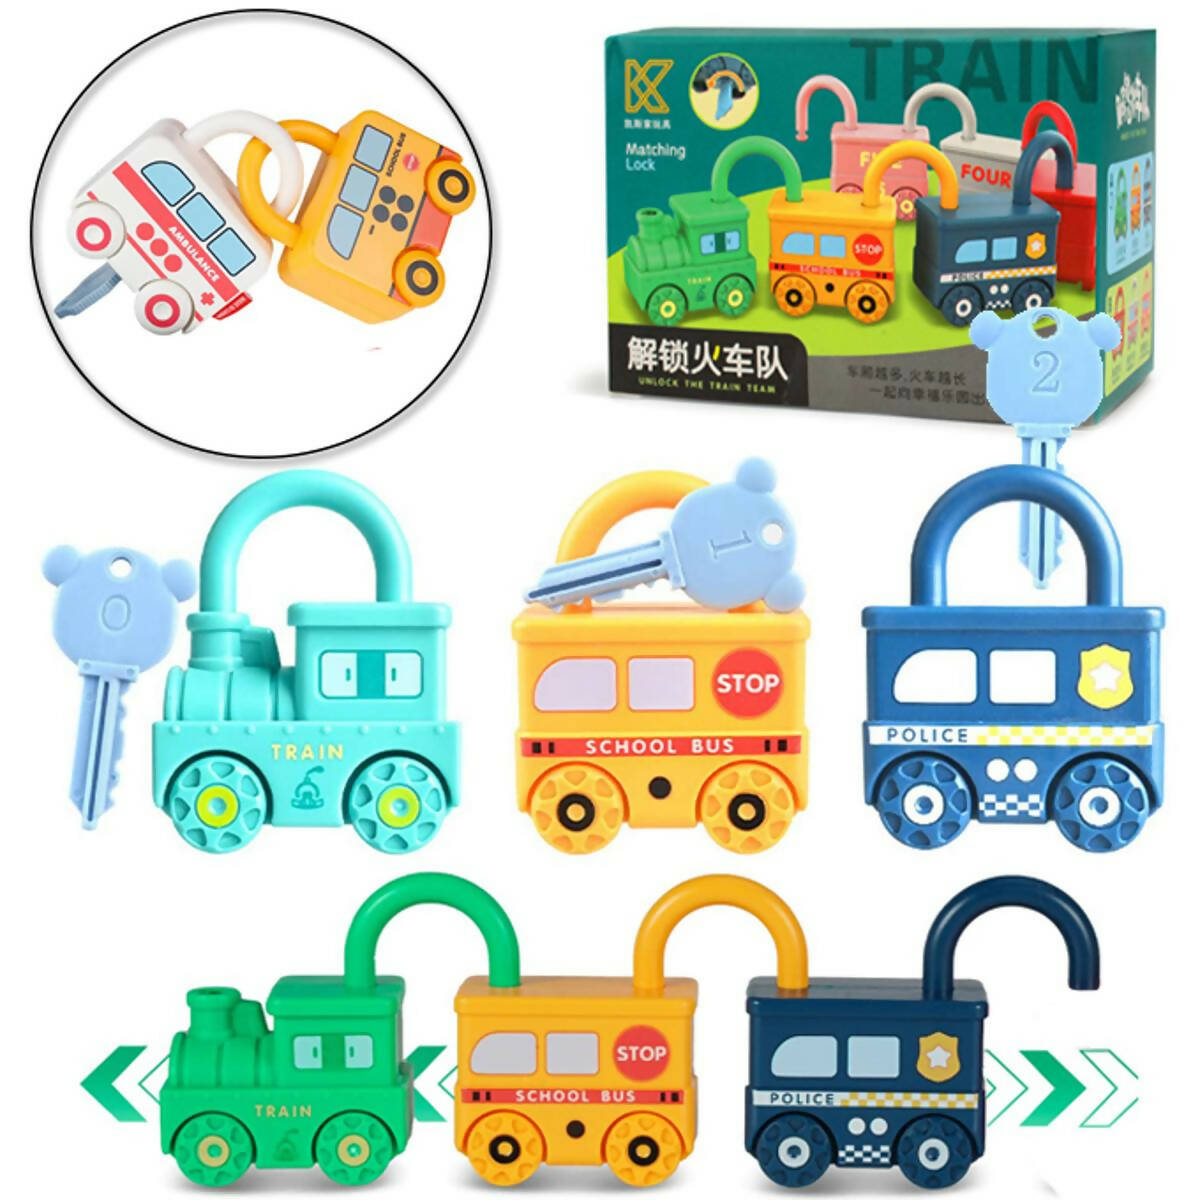 3 Pcs Learning Key Lock Numbers Matching Train Toy For Kids - 3 Pcs Key Lock Train - Multicolor